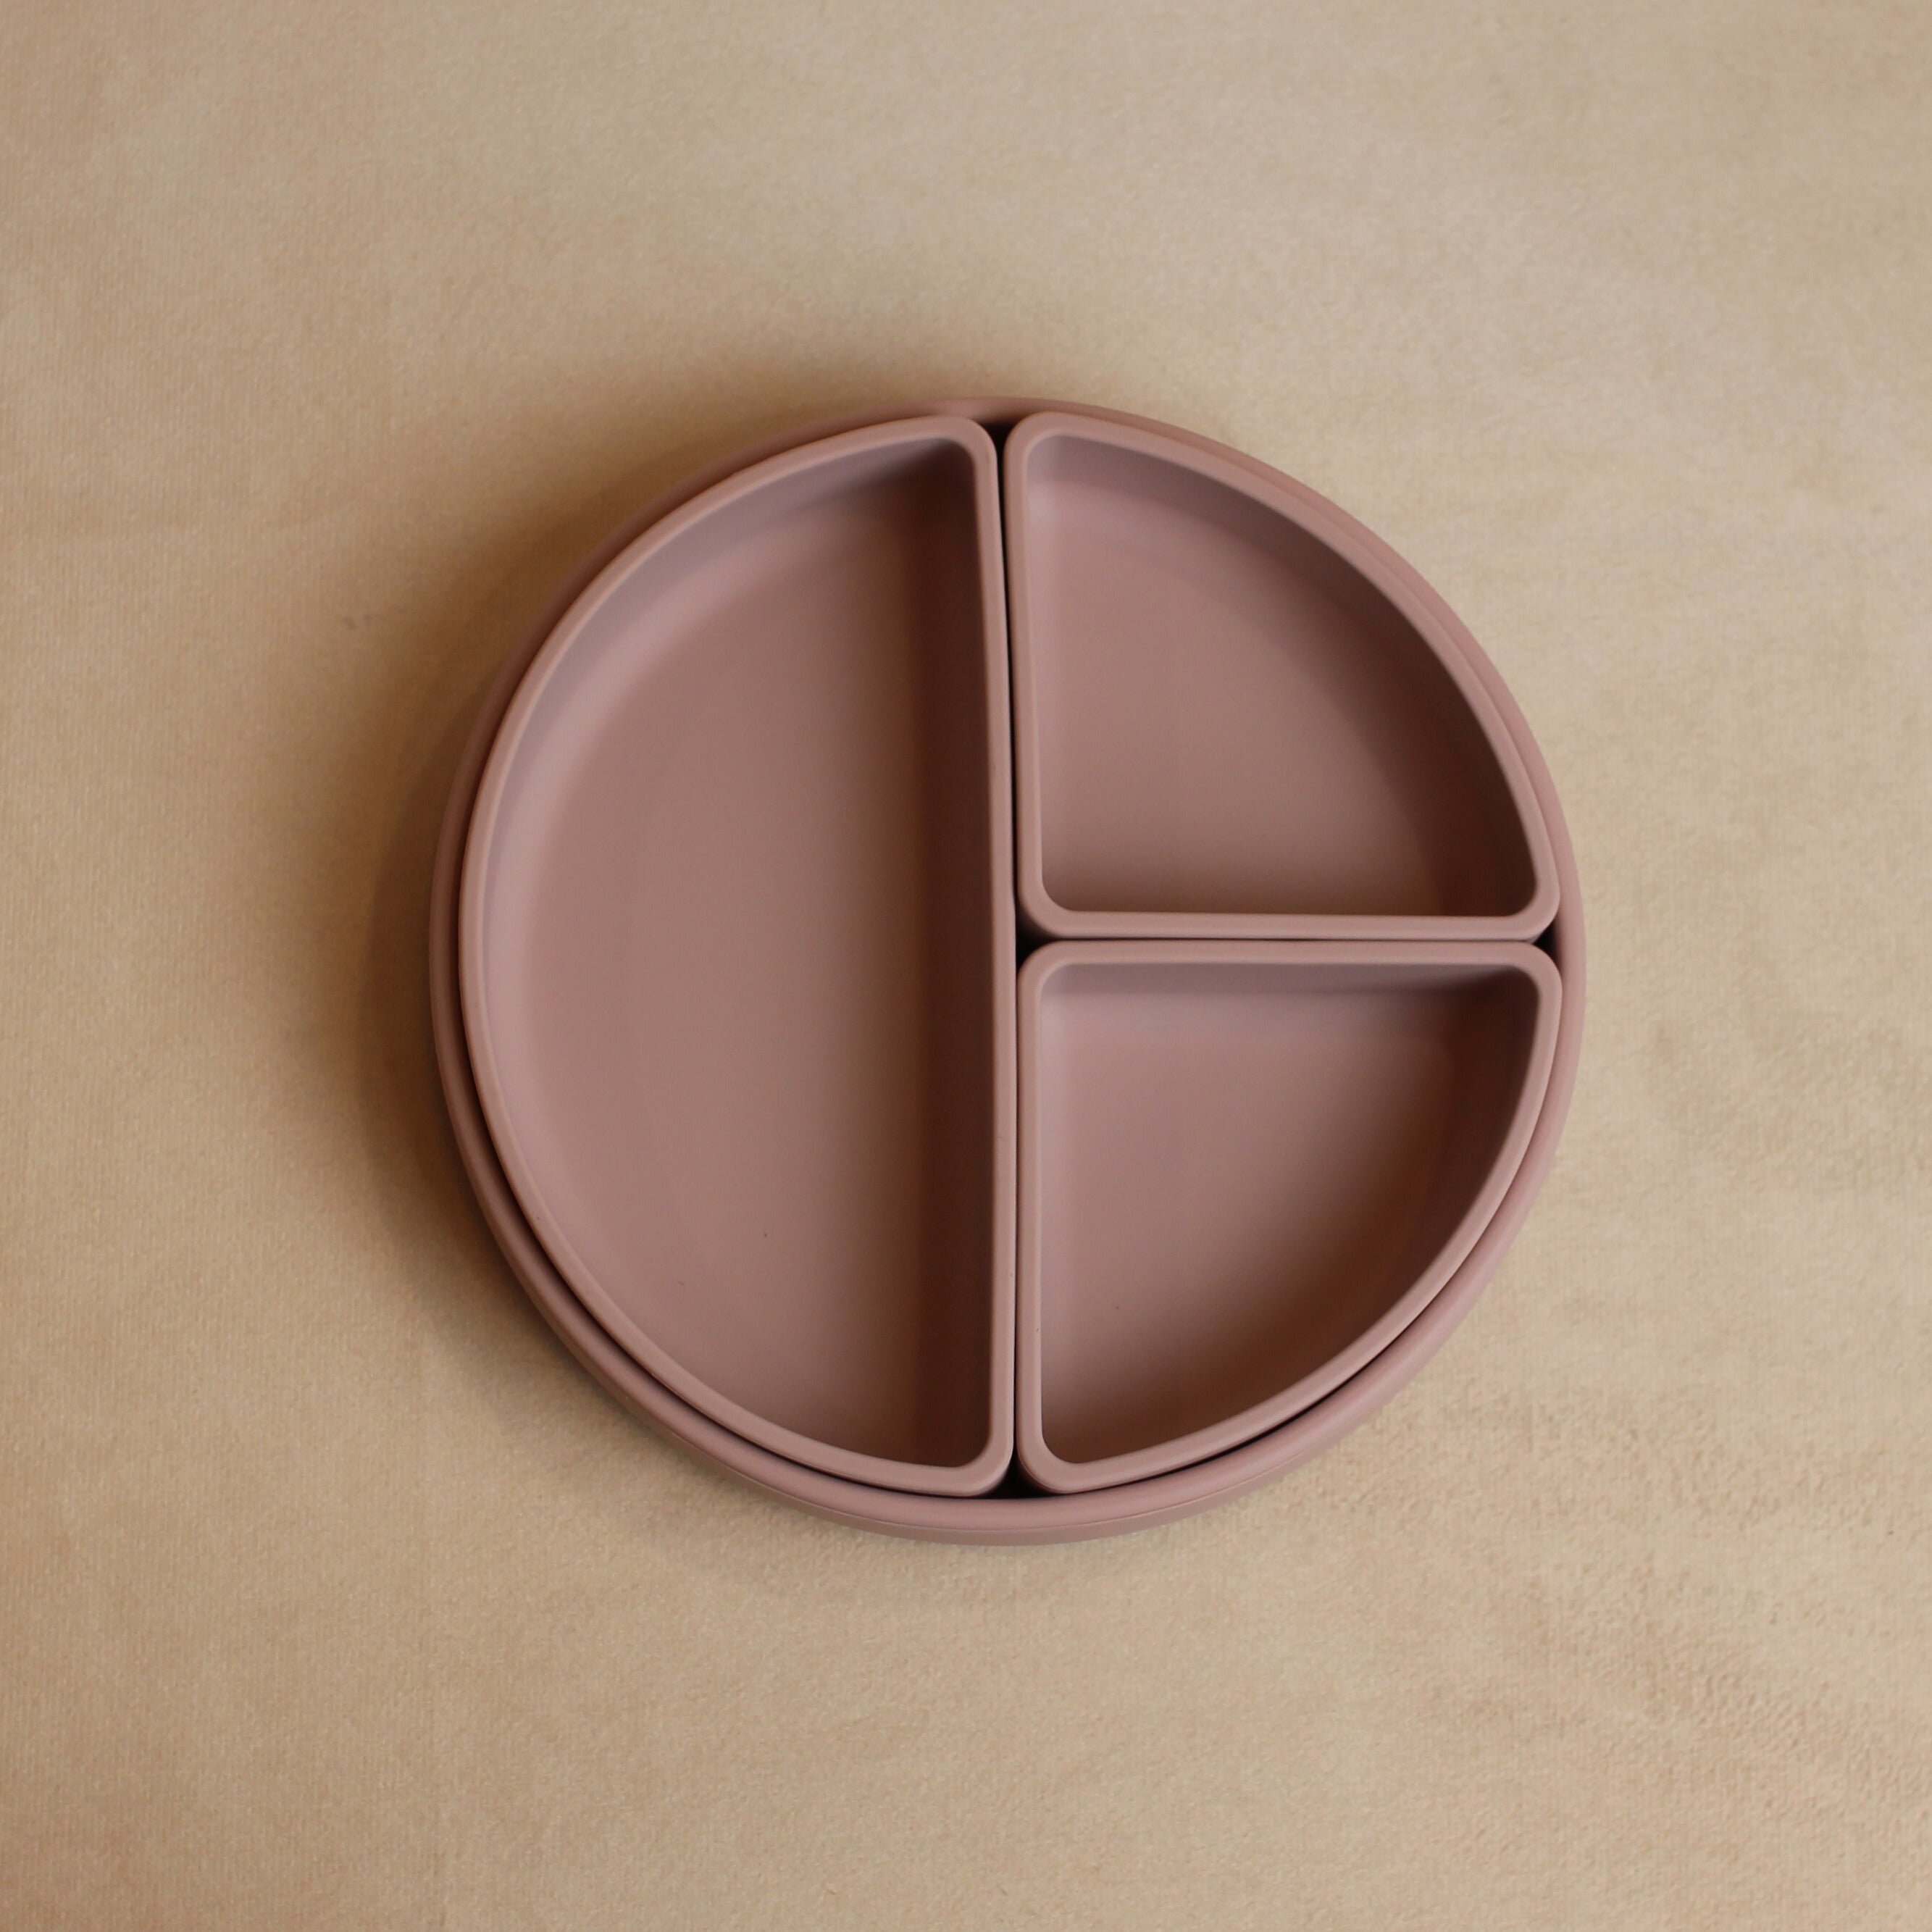 Overhead view of stay put plate in blush